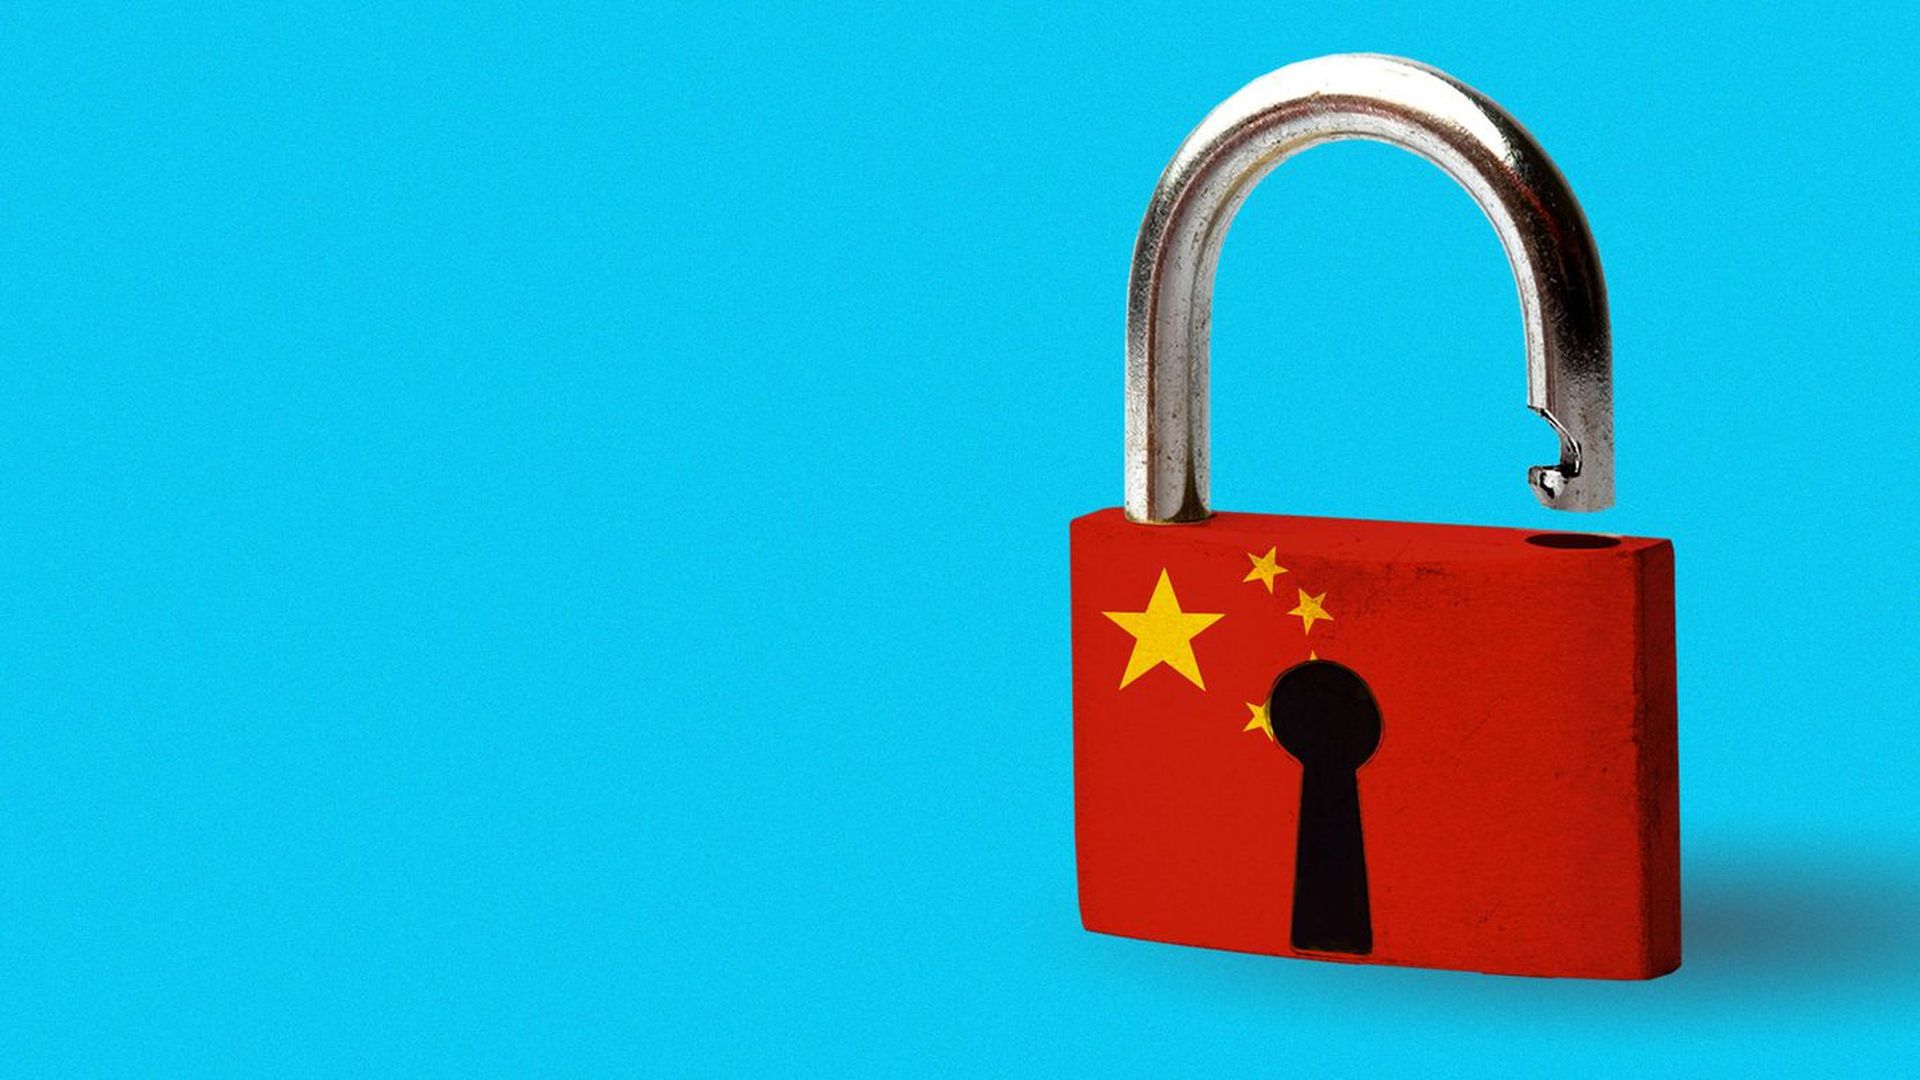 A lock with China's flag on it. 